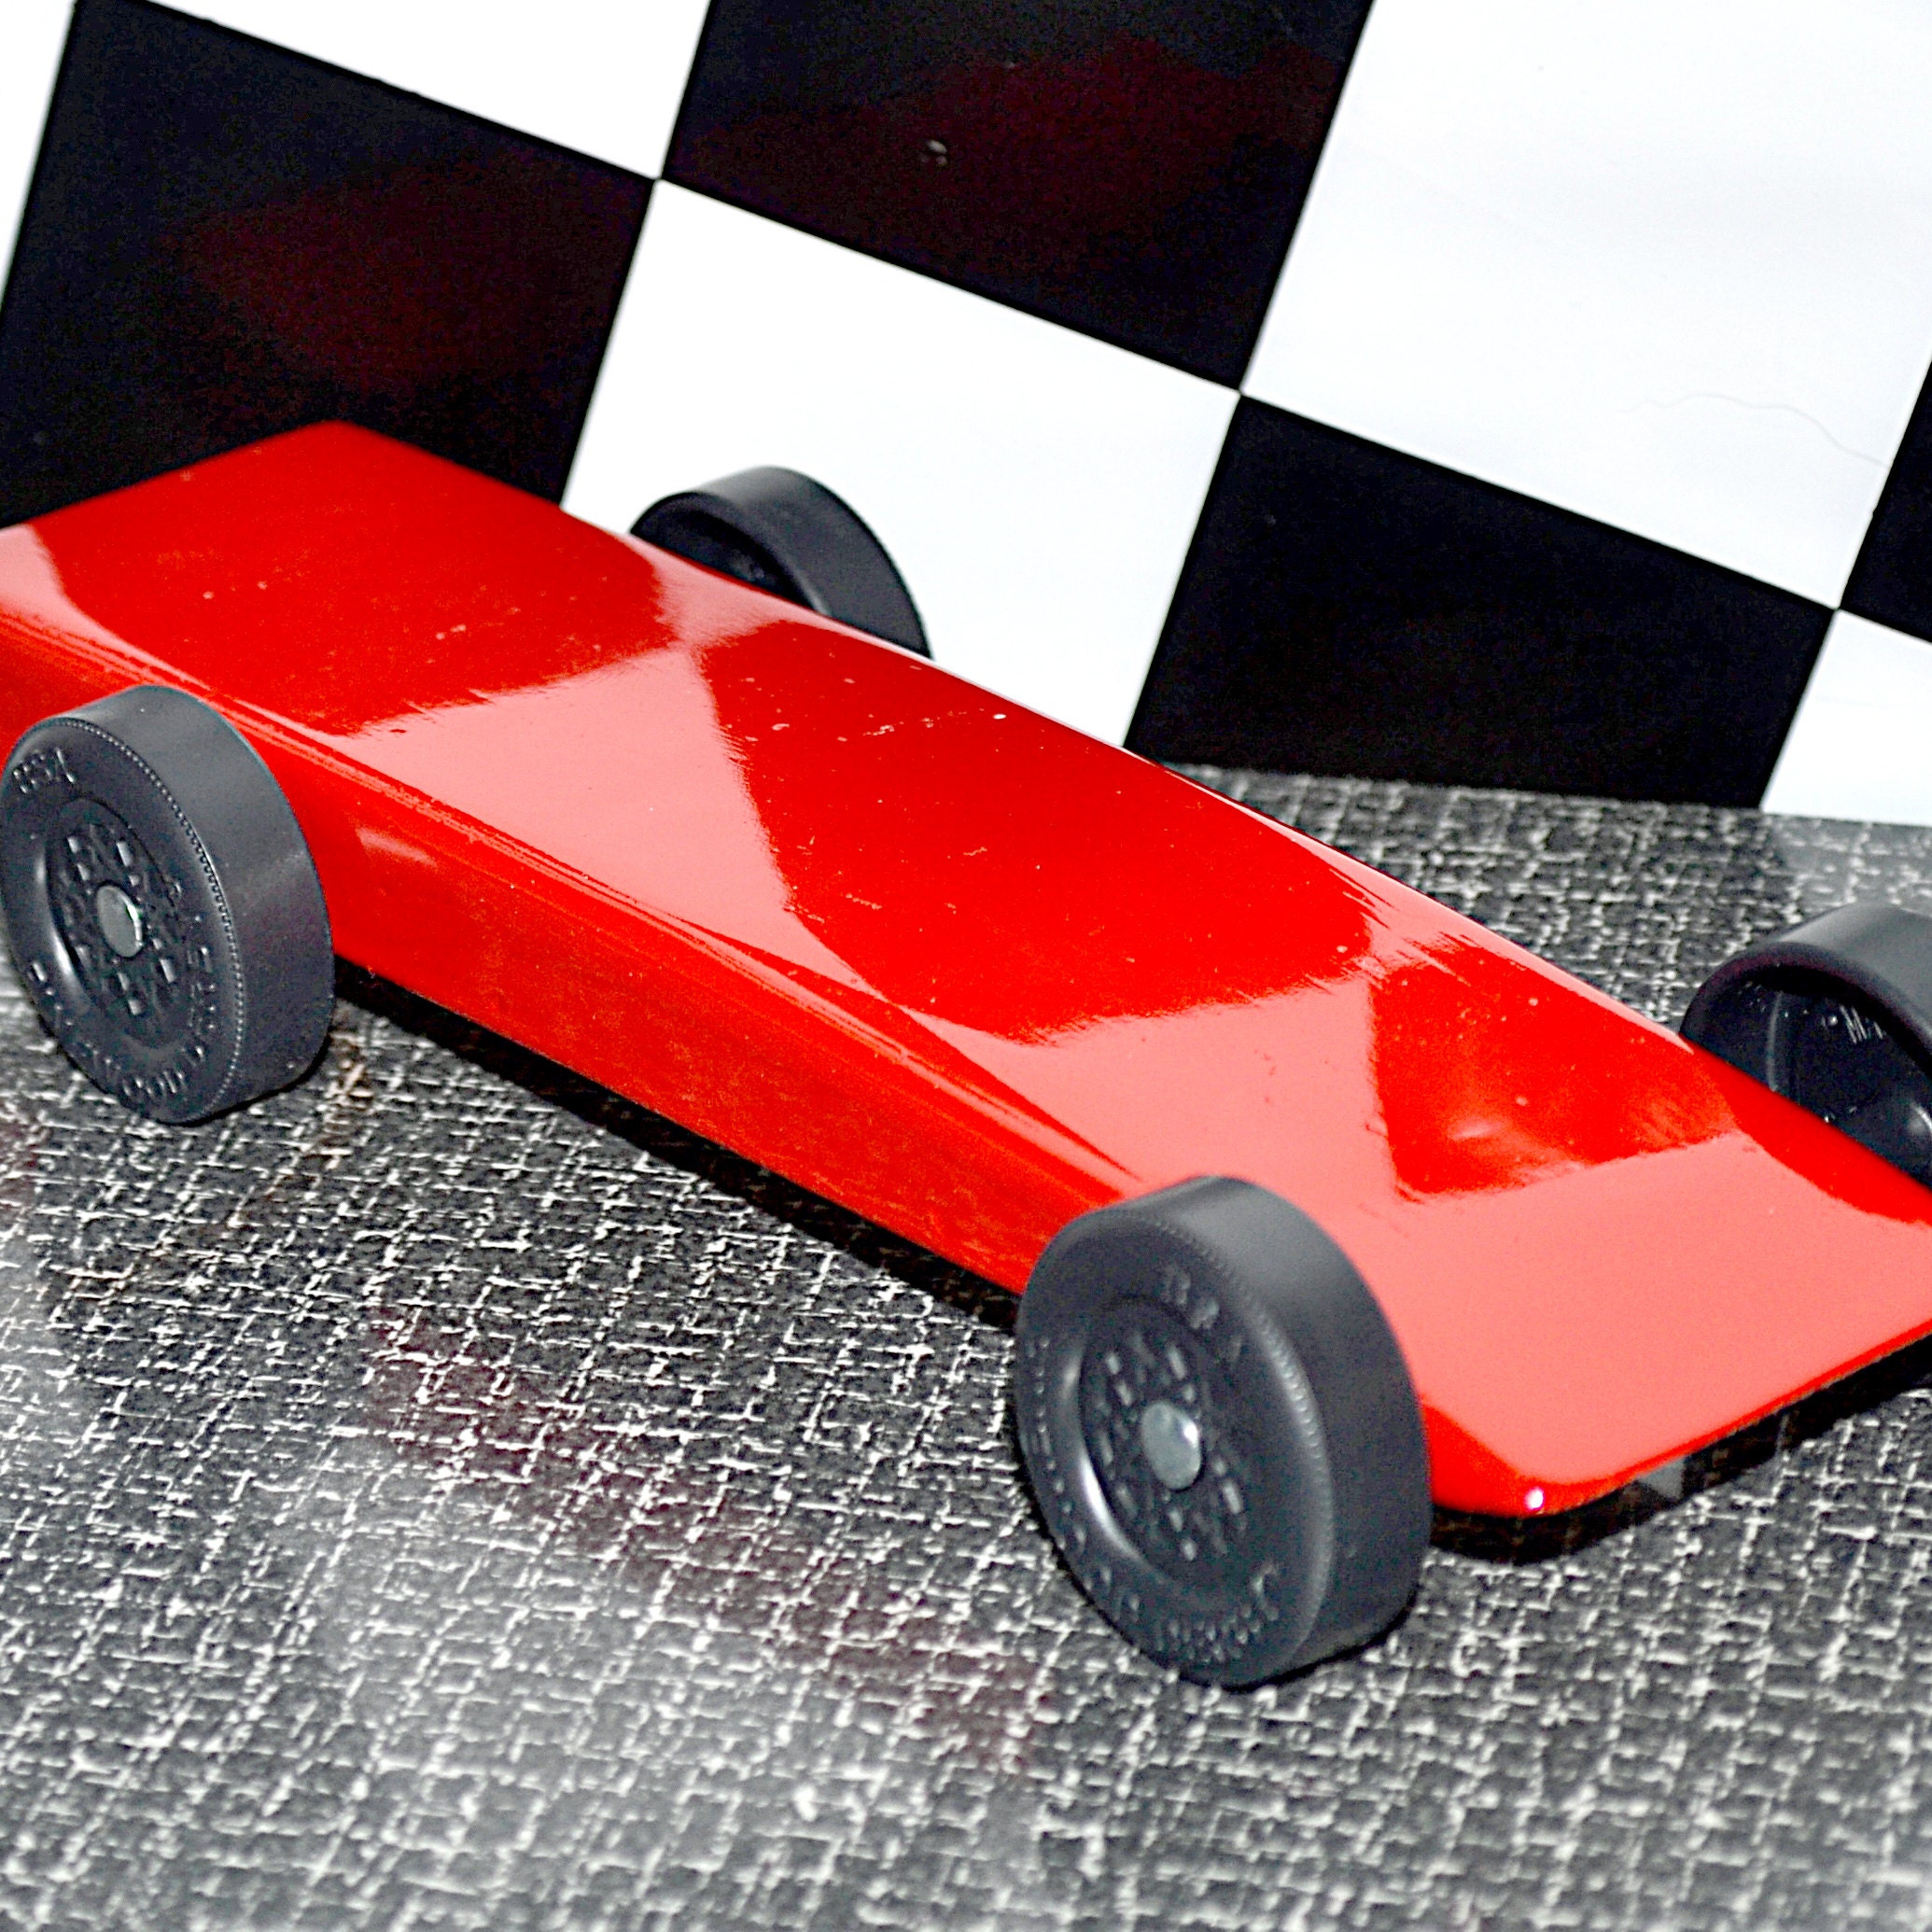 Tools & Accessories - Pinewood Derby - Learn & Explore